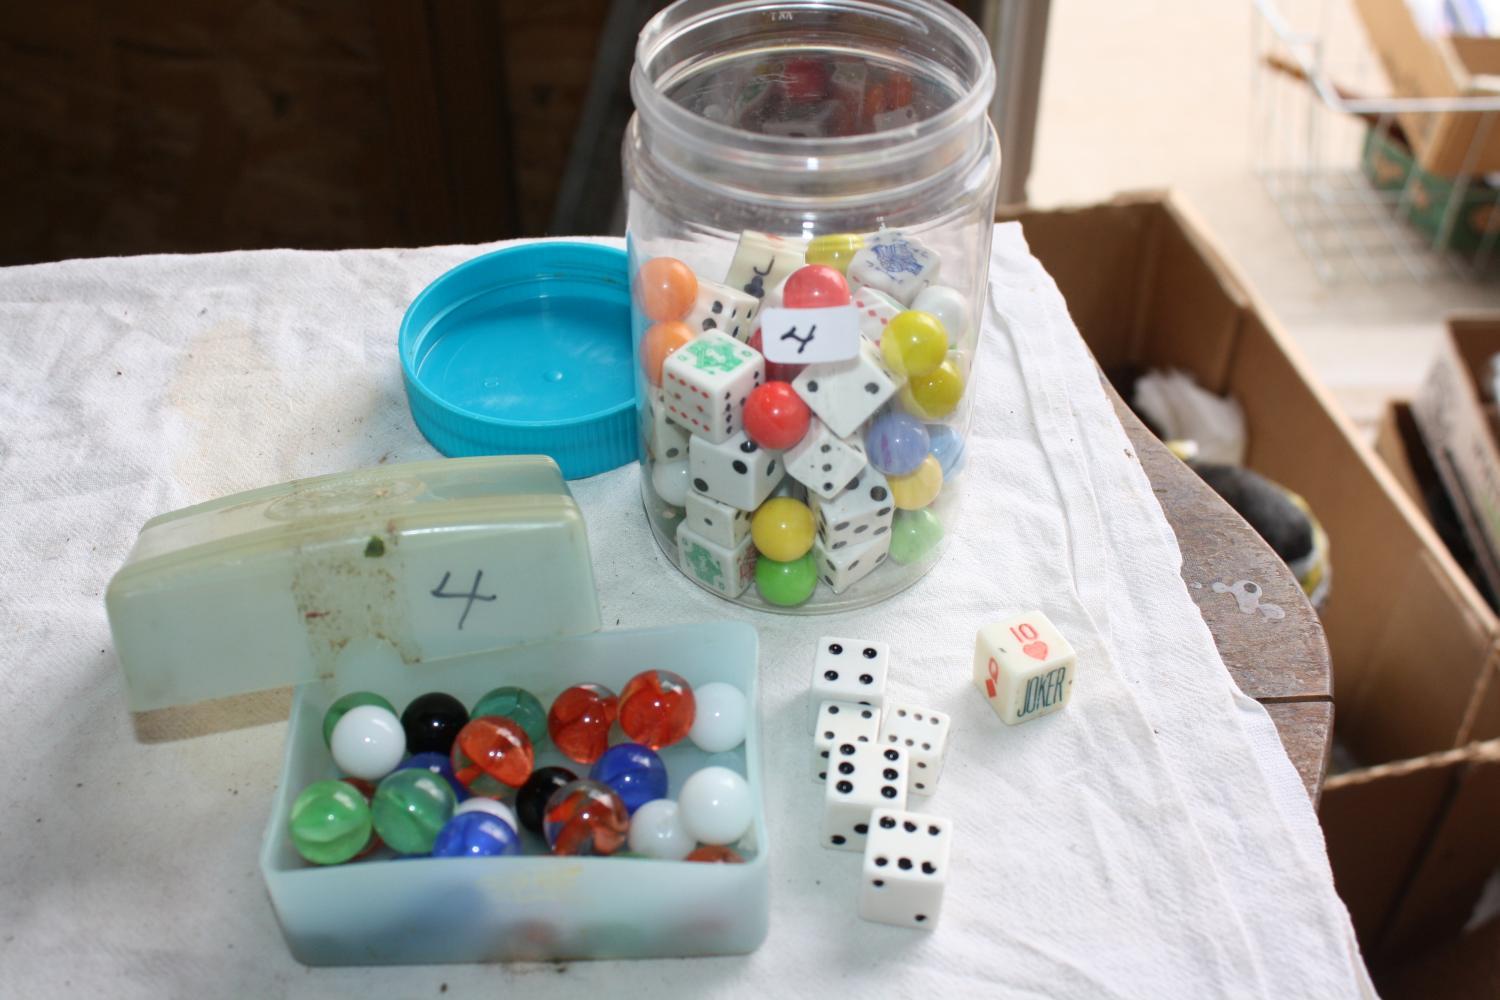 Vintage Dice and Marbles